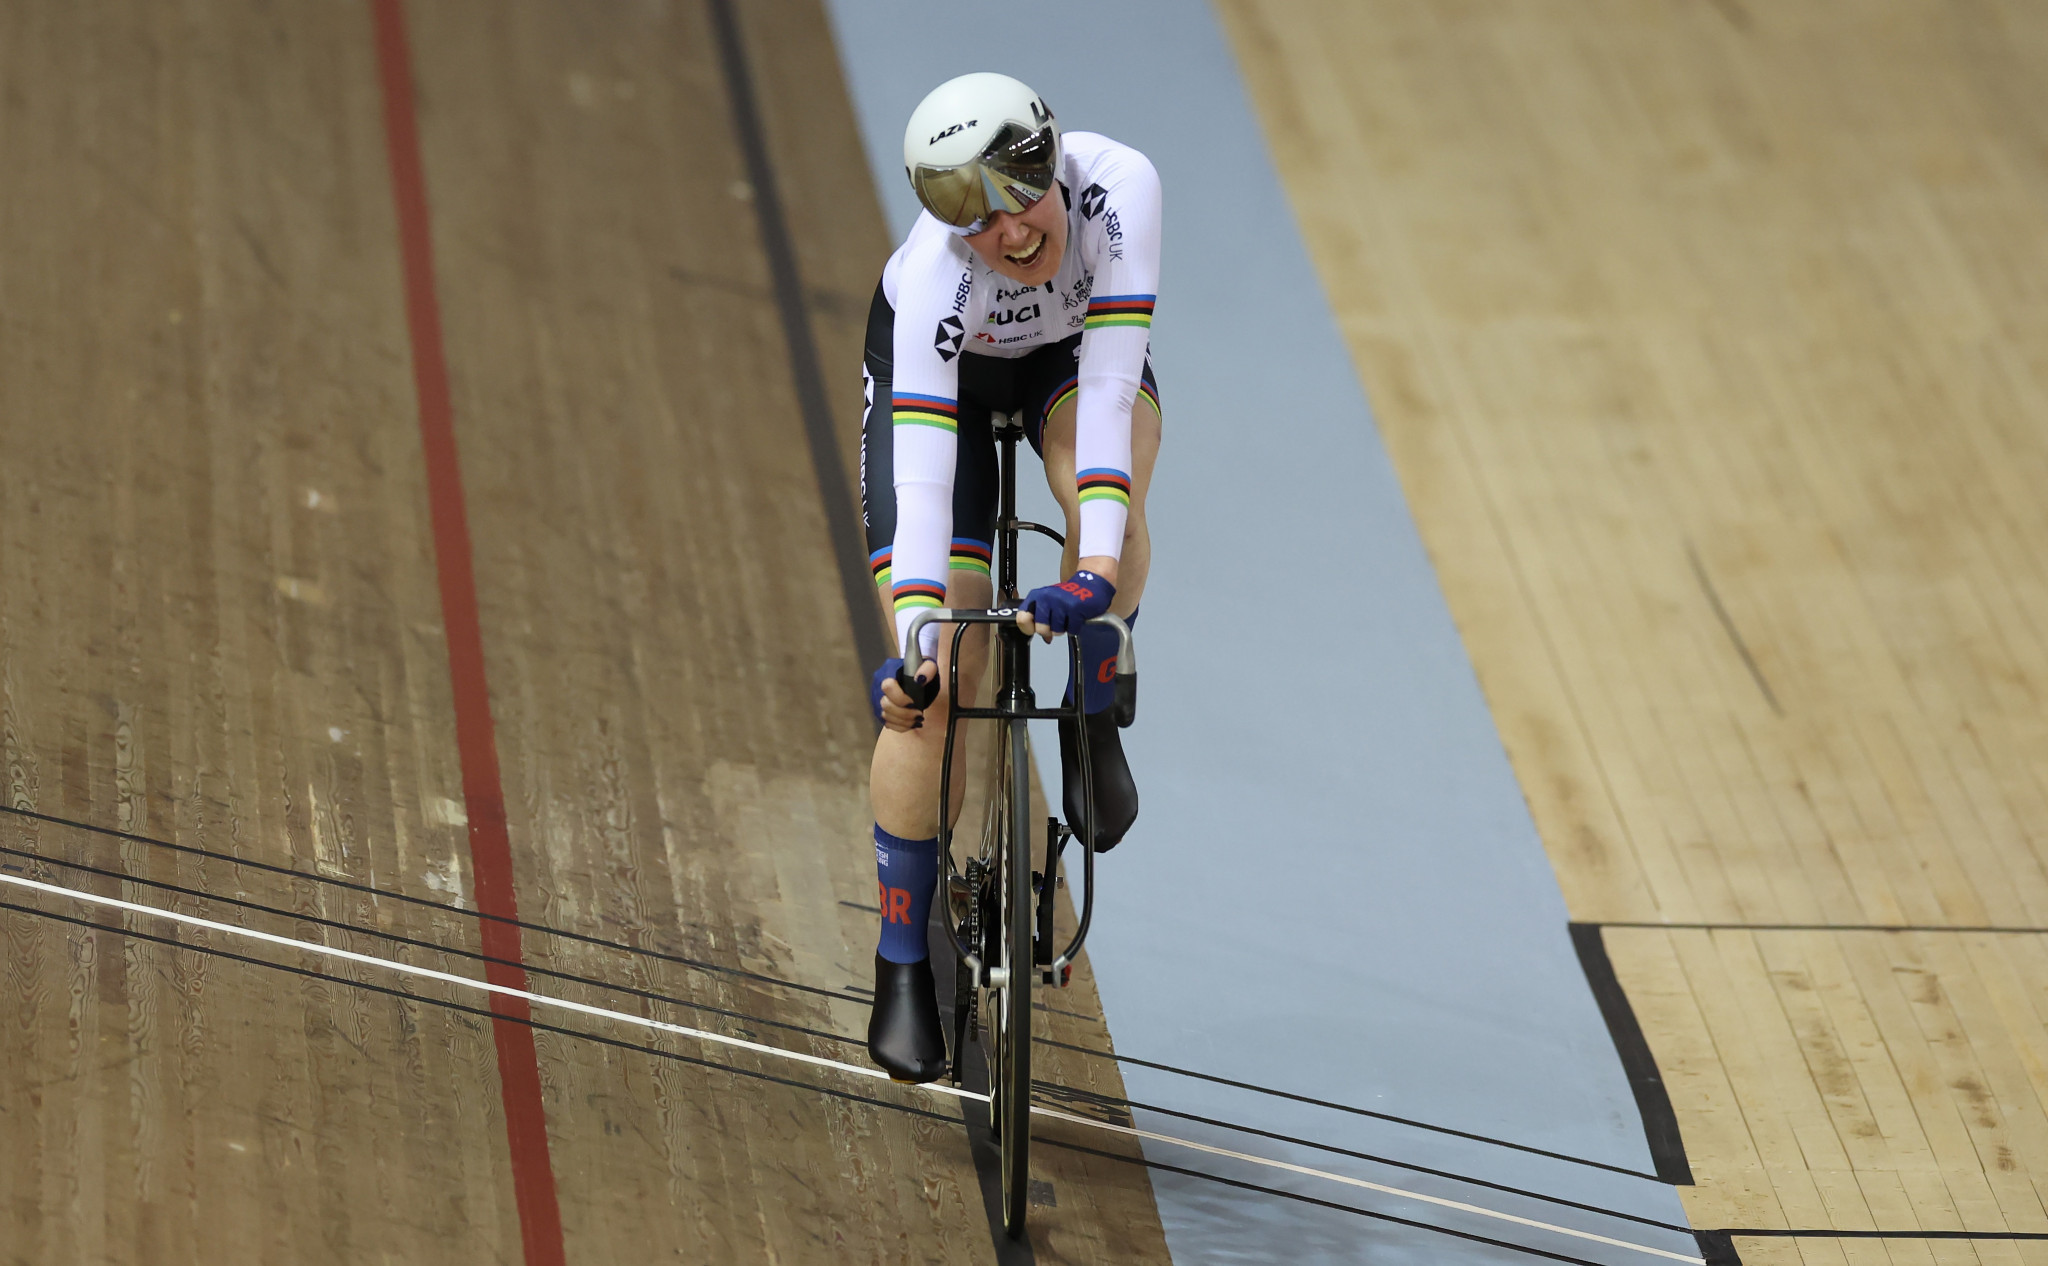 Katie Archibald said she was struck by a car when riding her bike ©Getty Images